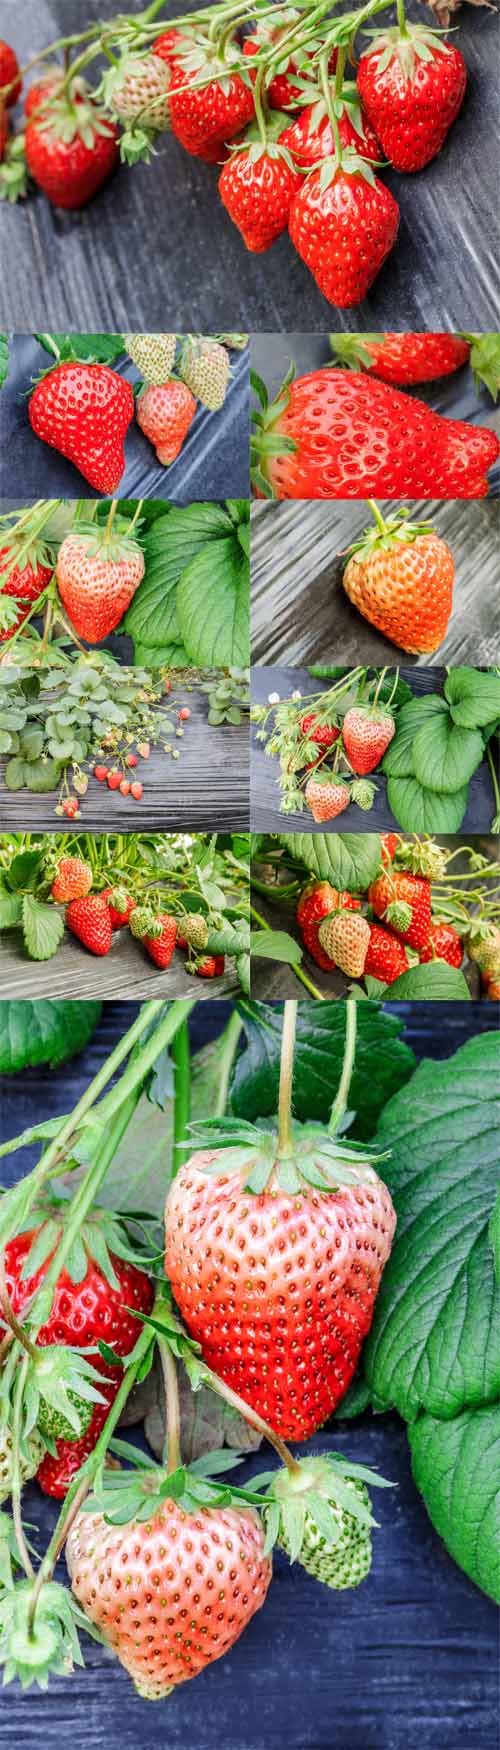 Photos - Ripe Strawberry Fruit Grows in the Plantation